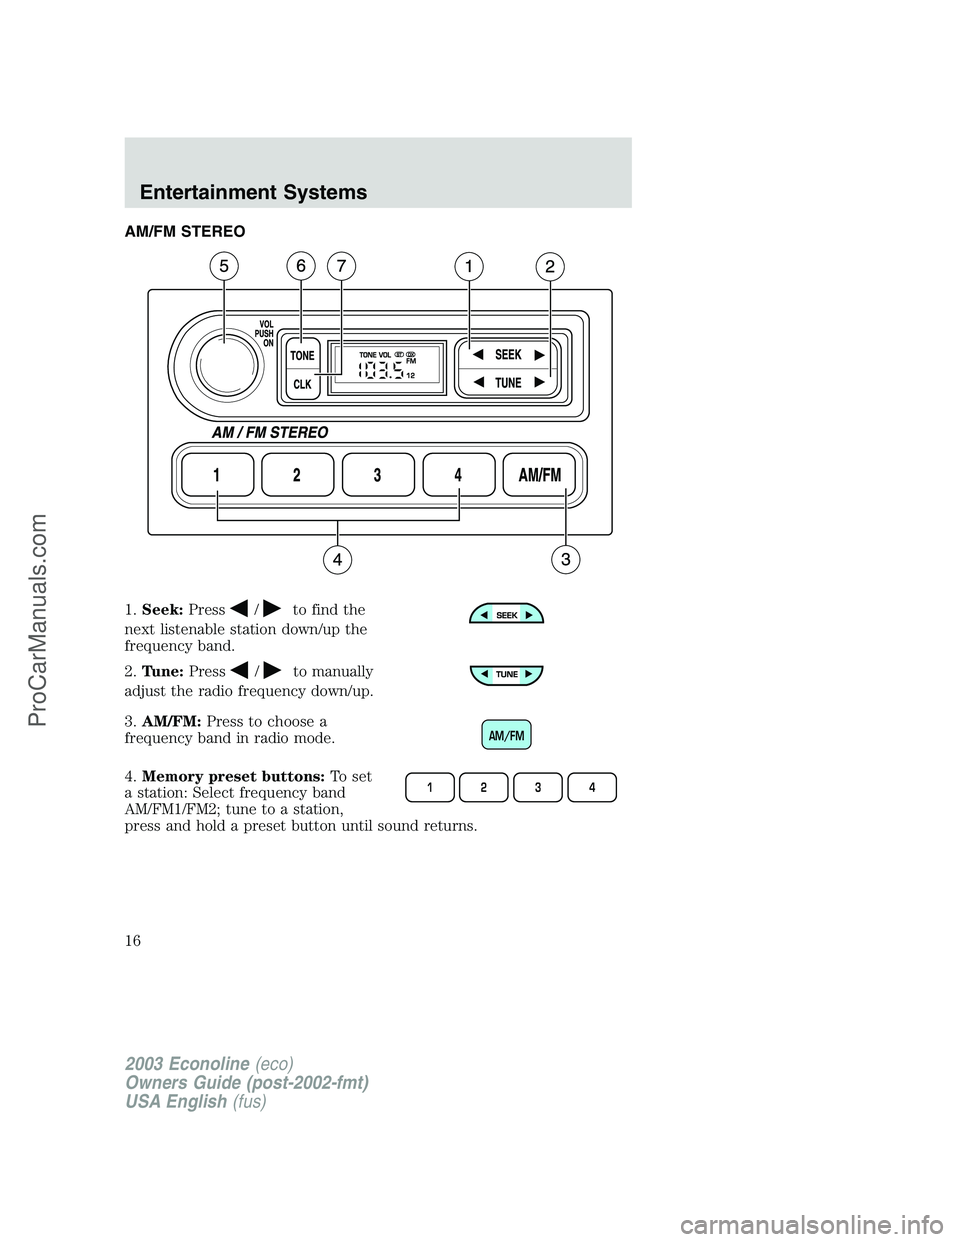 FORD E-450 2003 User Guide AM/FM STEREO
1.Seek:Press
/to find the
next listenable station down/up the
frequency band.
2.Tune:Press
/to manually
adjust the radio frequency down/up.
3.AM/FM:Press to choose a
frequency band in rad